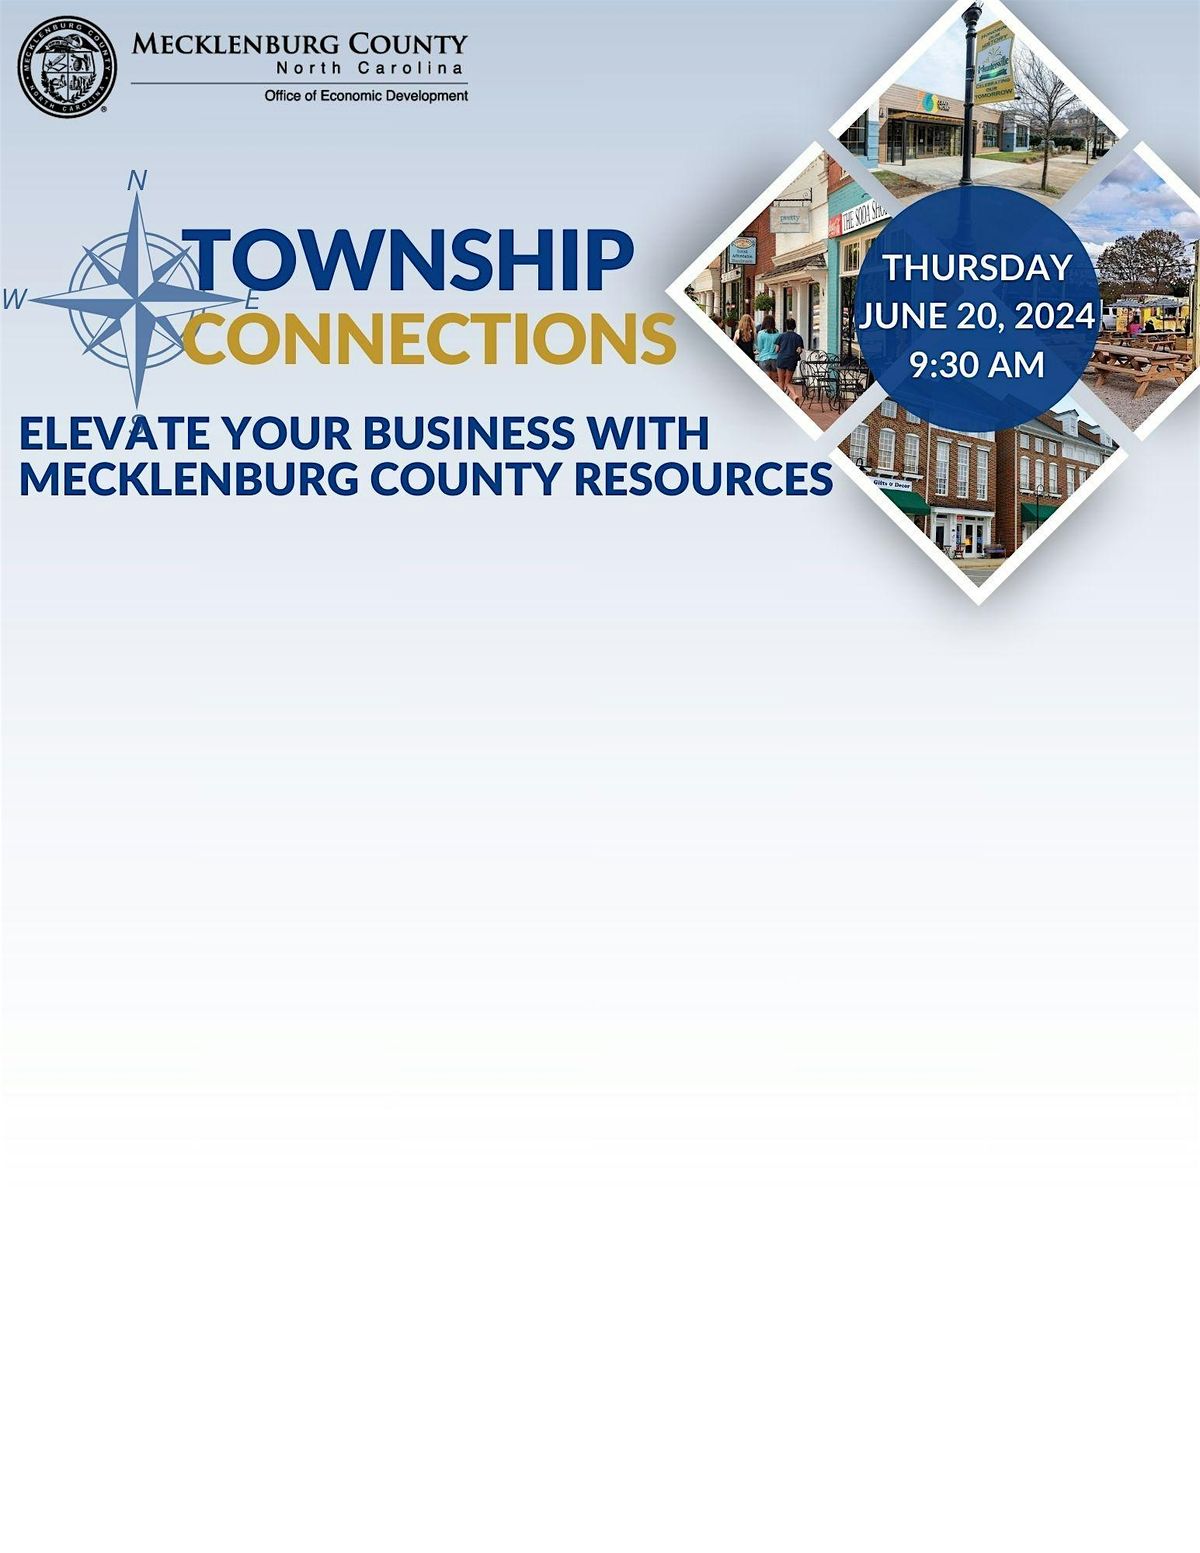 Township Connections - Elevate Your Business  with Us (Matthews)